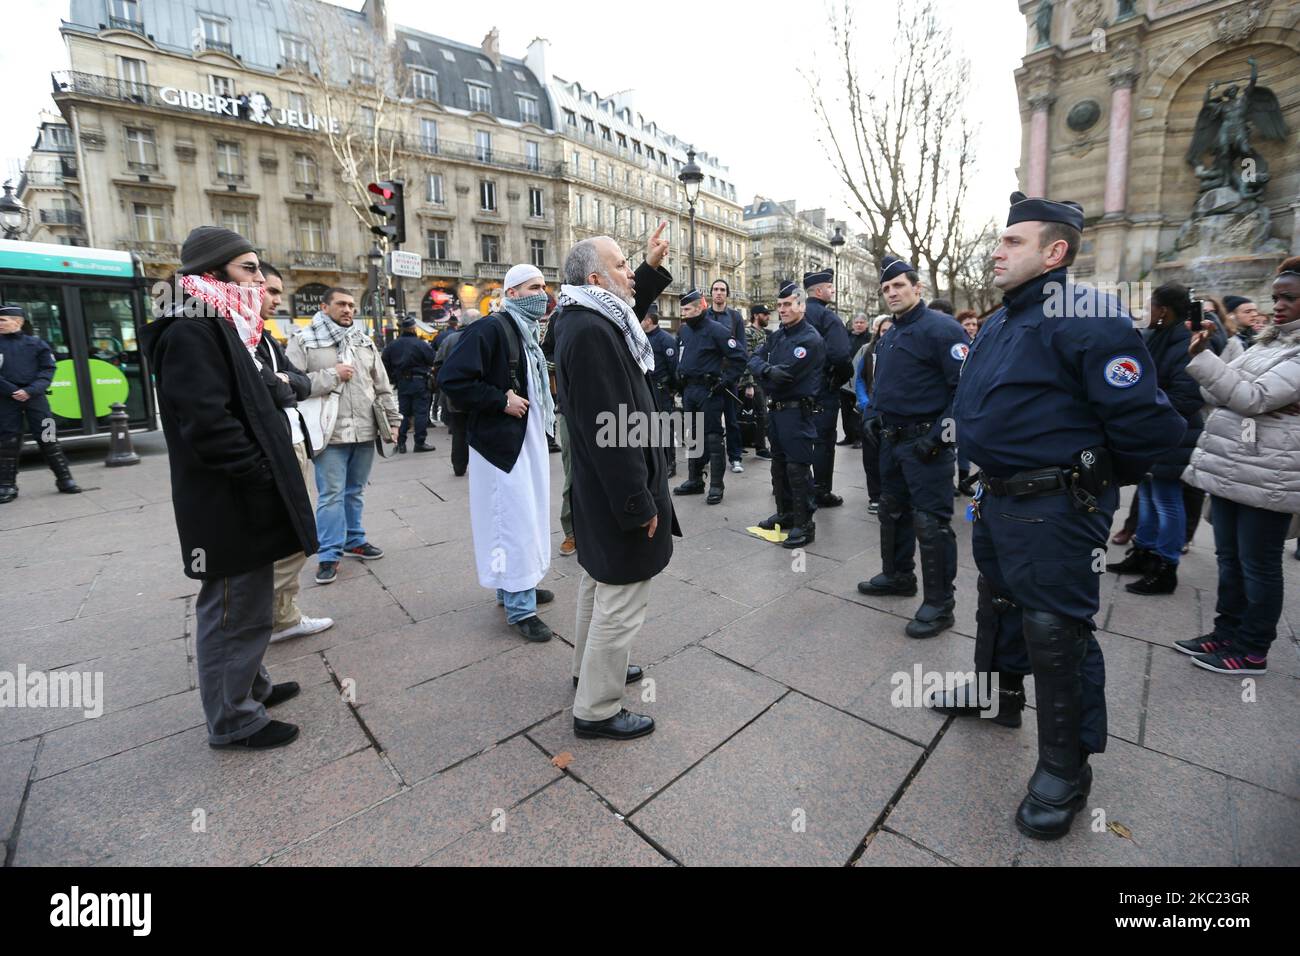 This picture taken on December 29, 2012, in Paris, shows the President of the Cheikh Yassine collective Abdelhakim Sefrioui (C with a white djellaba) protesting in front of French anti-riot gendarmes to support Palestine. Abdelhakim Sefrioui is involved in the France teacher attack near the College du Bois d'Aulne, in the town of Conflans-Sainte-Honorine, some 30km (20 miles) north-west of central Paris, on october 16, 2020. The number arrested rose to 11 on october 18, with police investigating possible links to Islamic extremism. (Photo by Michel Stoupak/NurPhoto) Stock Photo